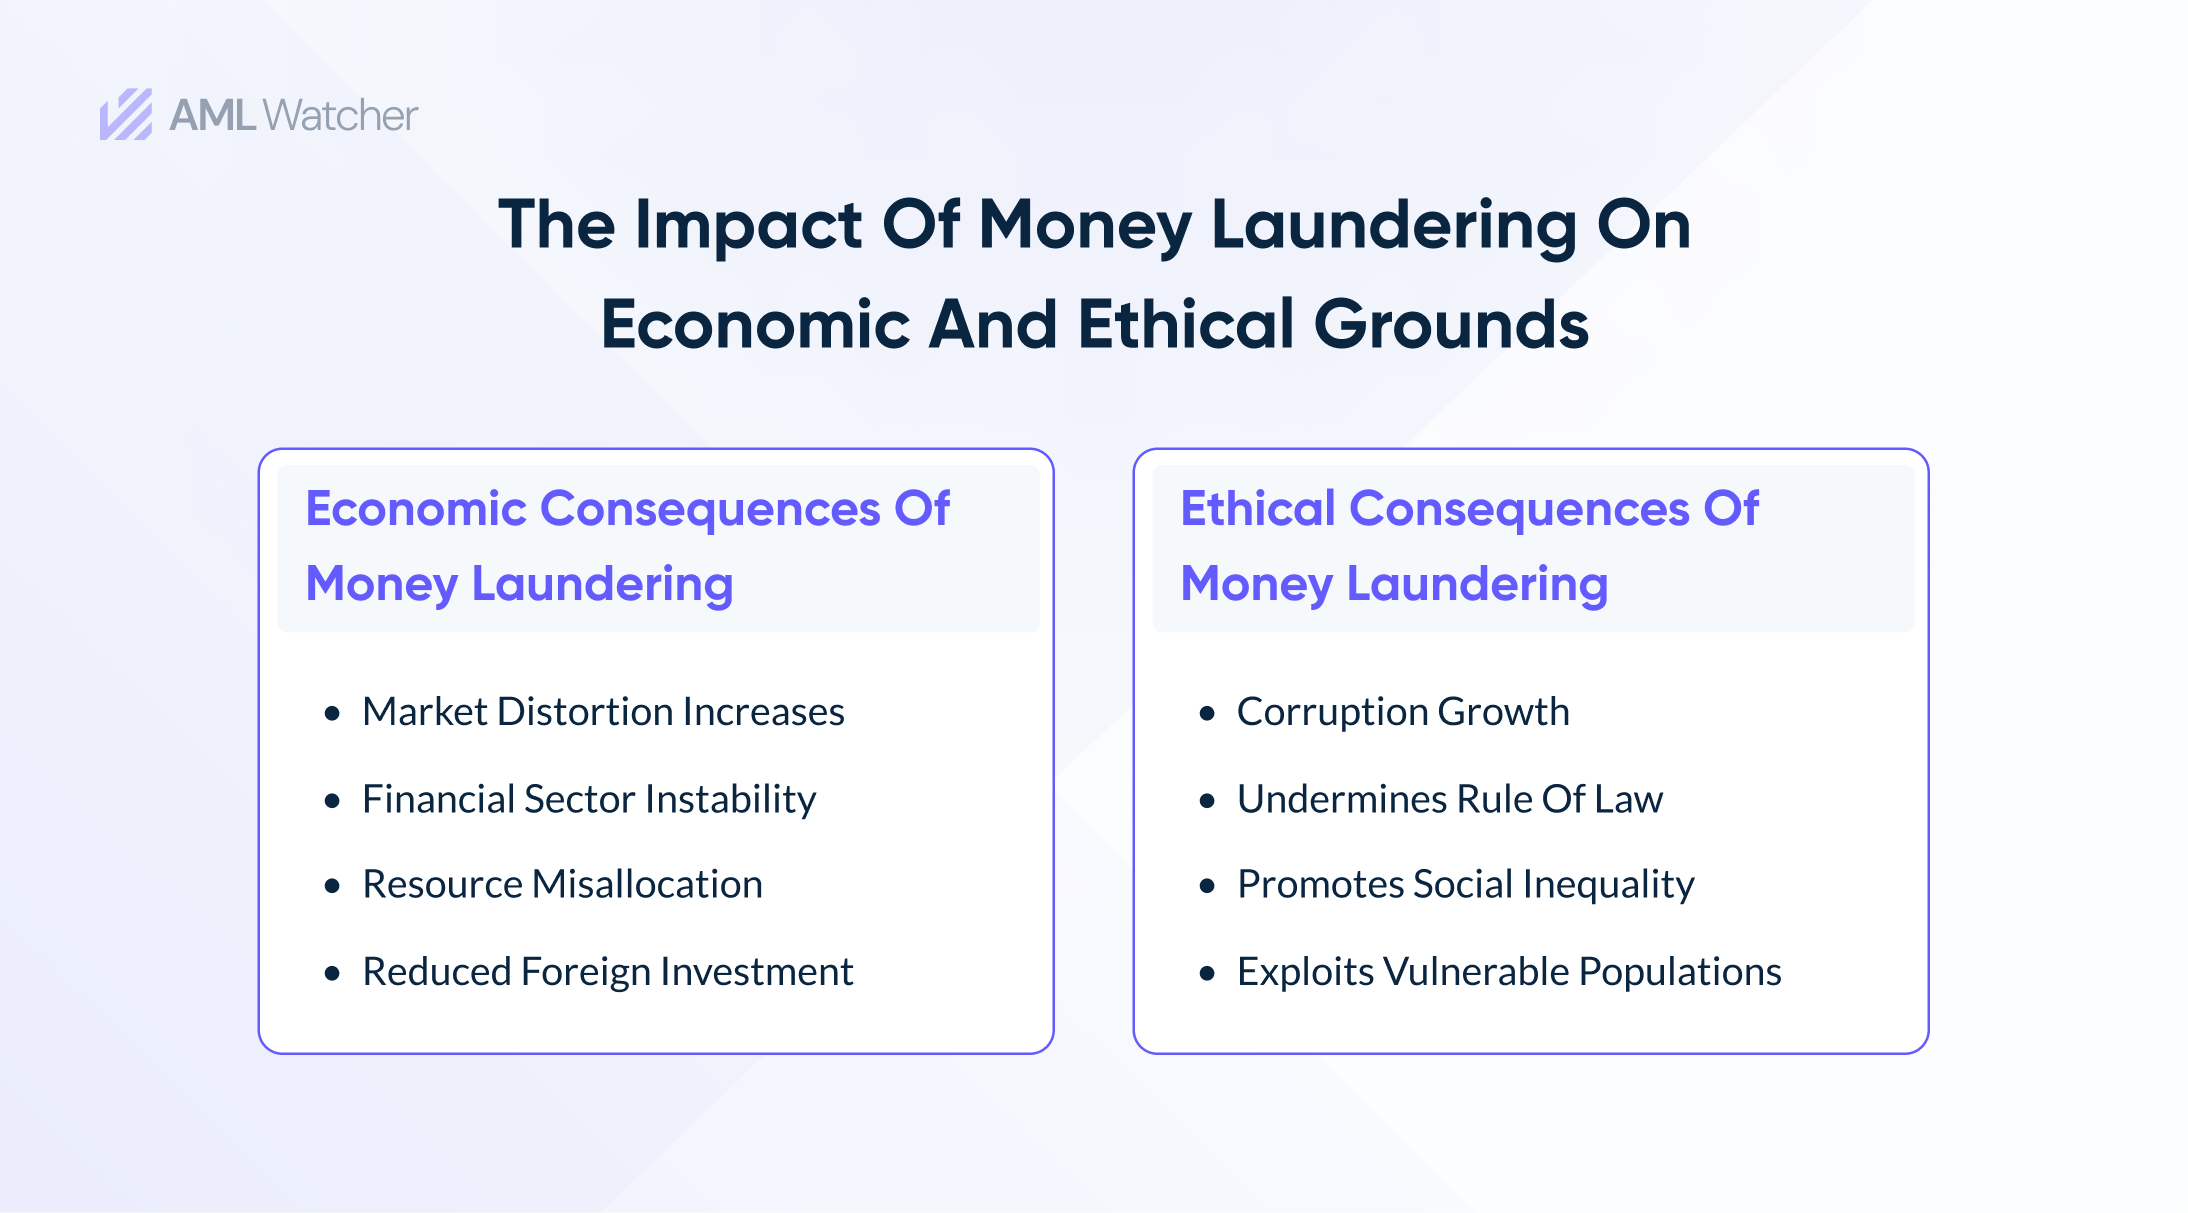 The featured image describes the consequences of money laundering on national and international economic and ethical grounds.